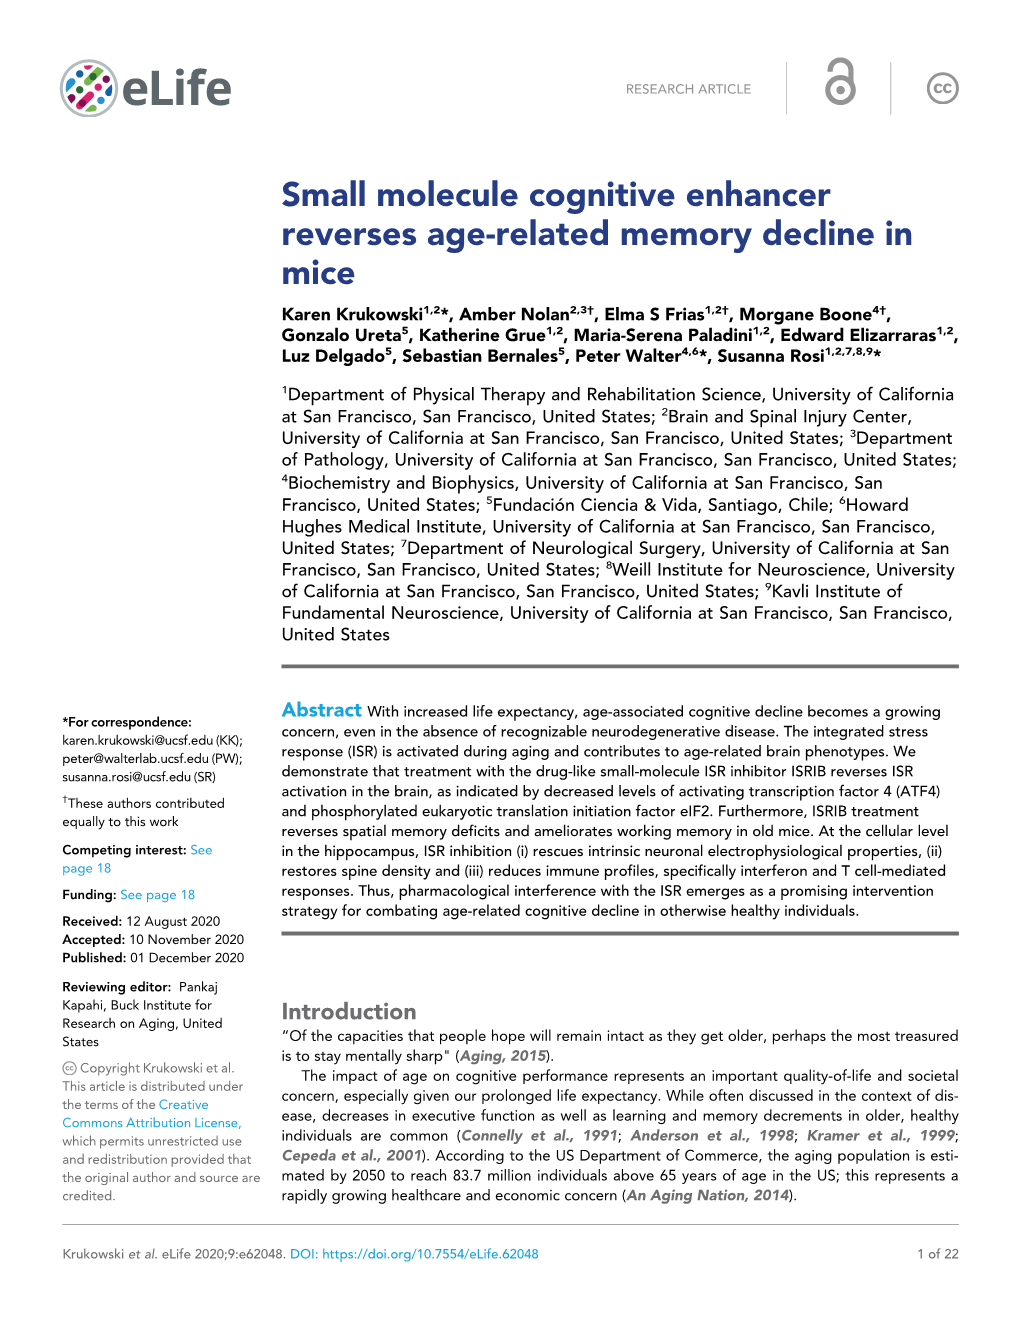 Small Molecule Cognitive Enhancer Reverses Age-Related